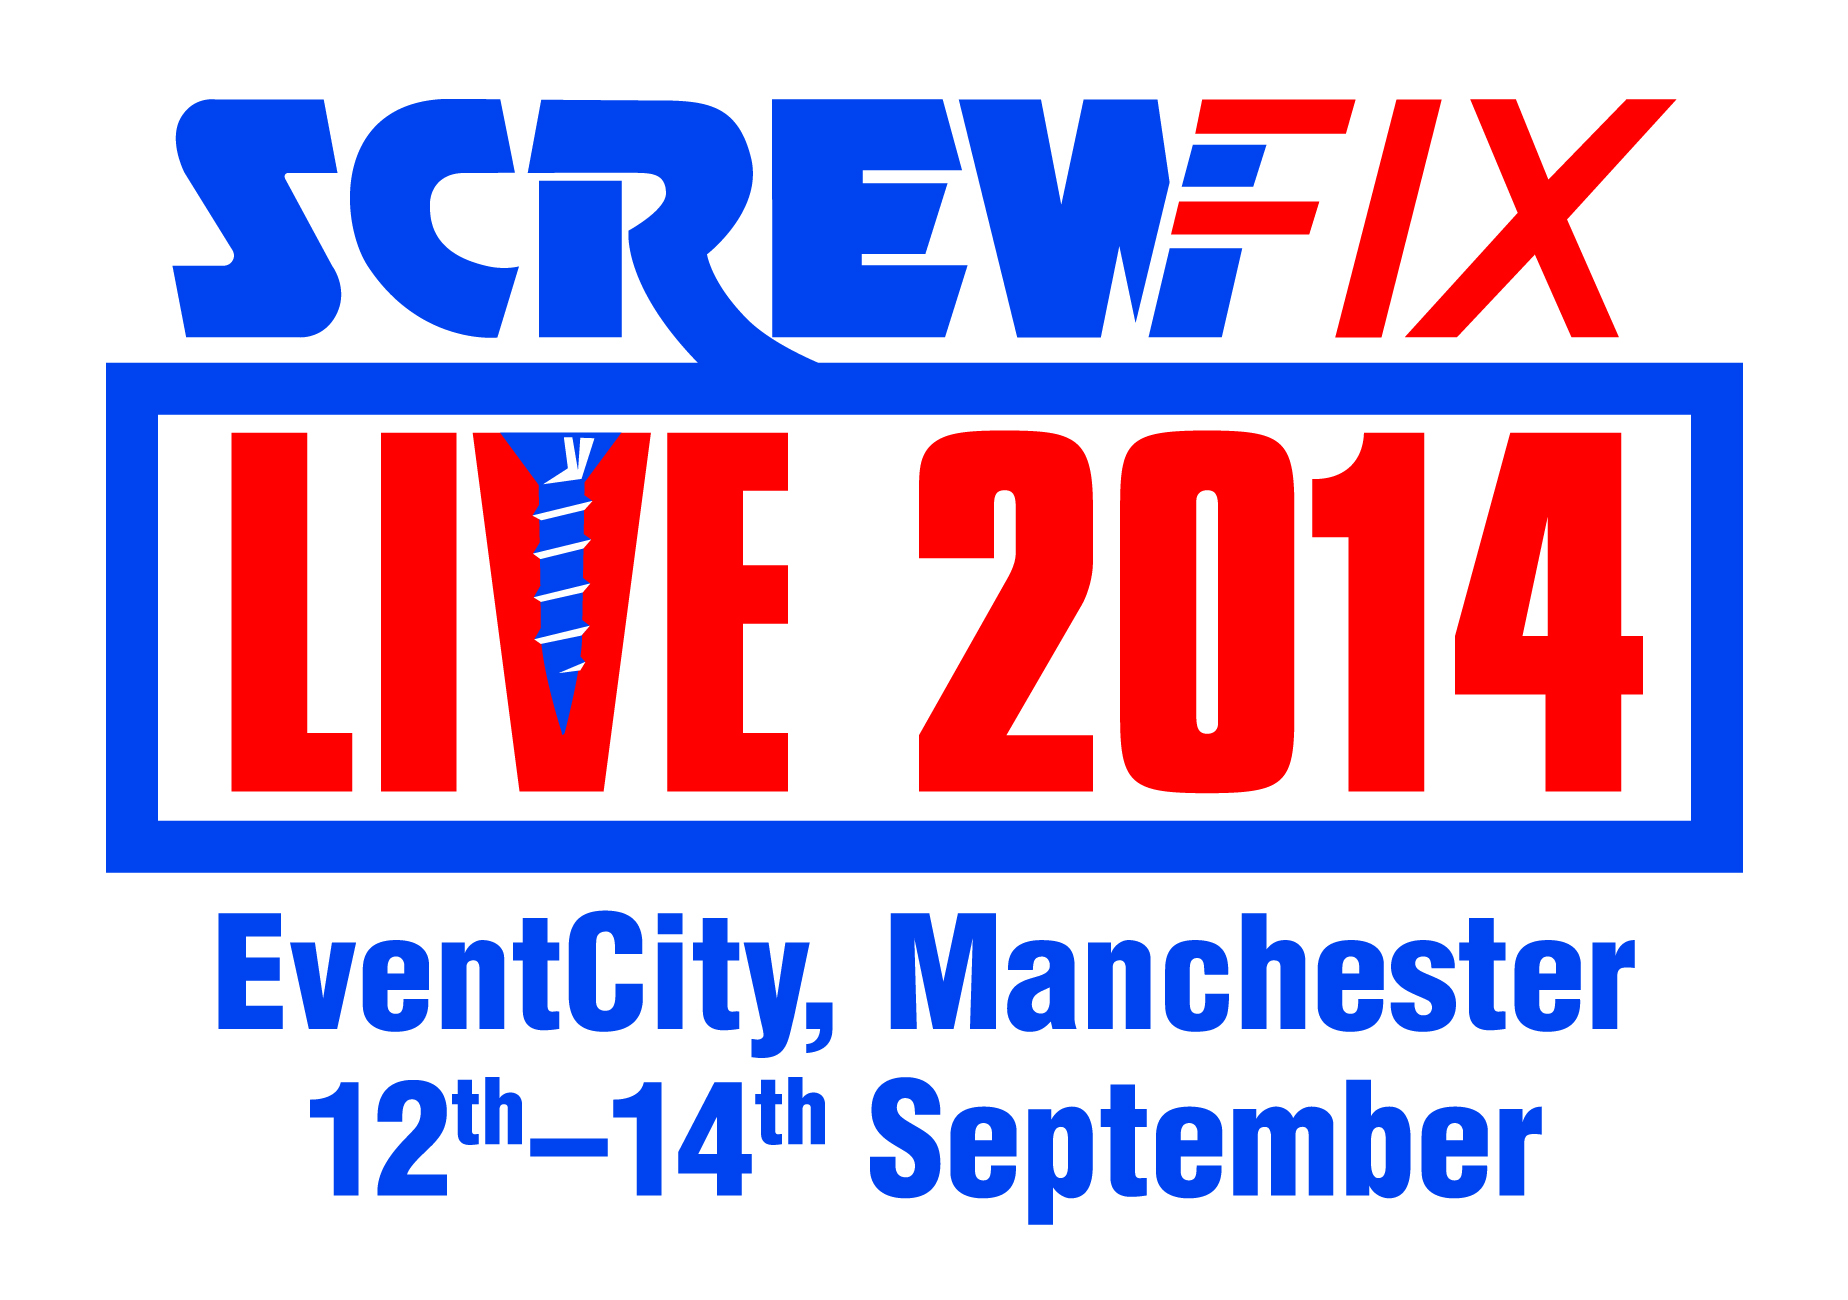 Screwfix Live  announces 2014 dates and exhibitor registration opens